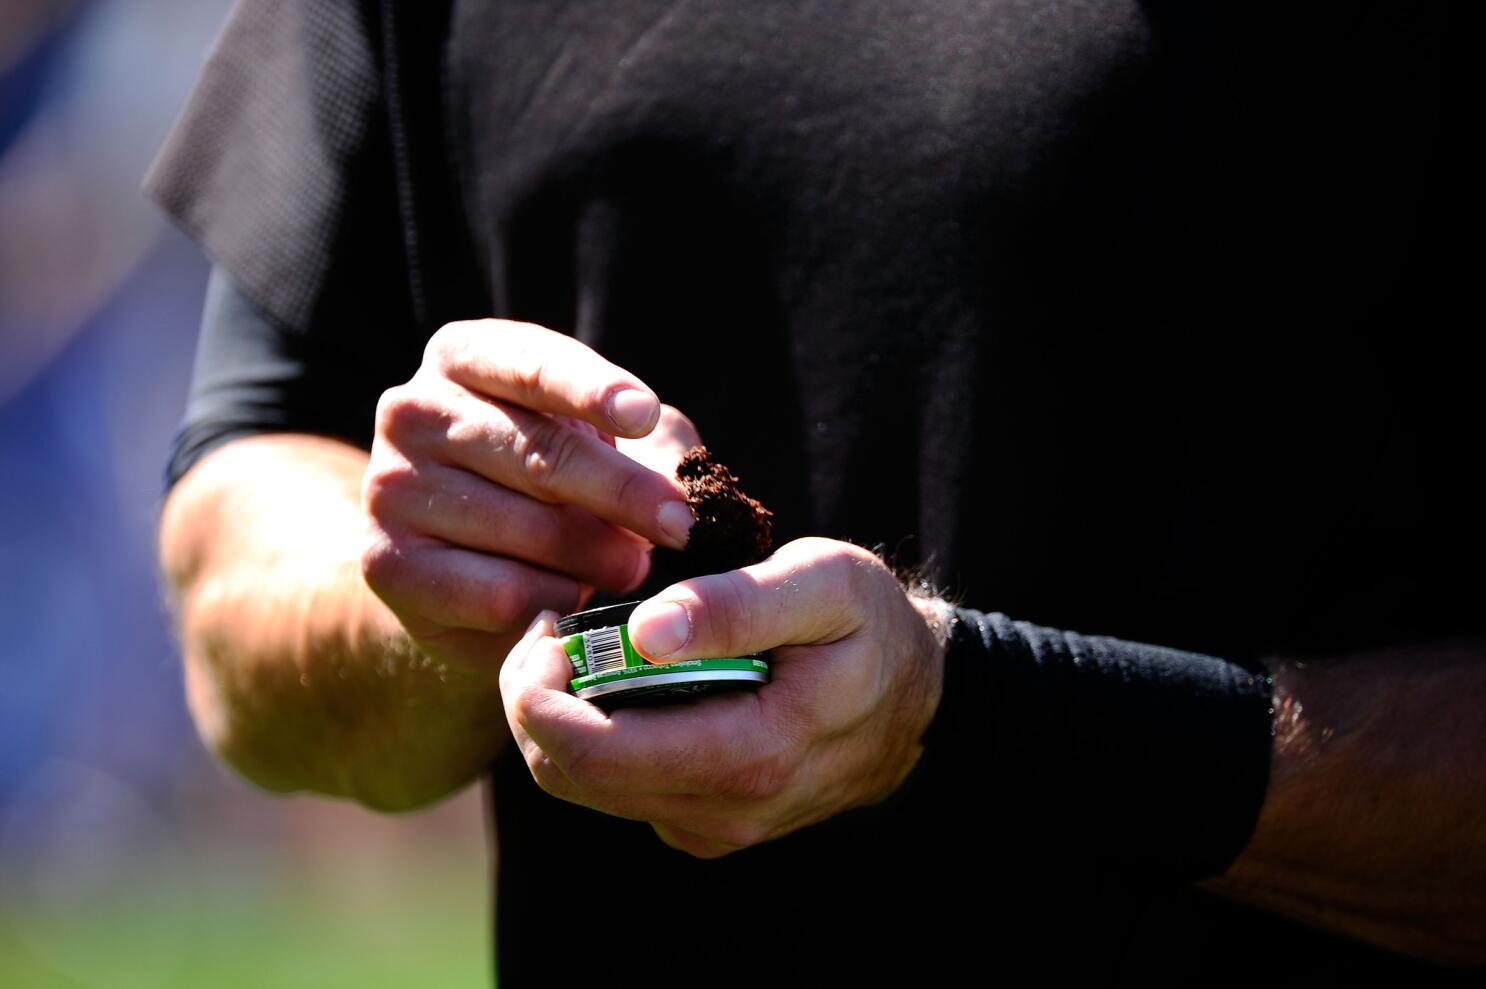 With or without ban, tobacco's influence in baseball on its way out